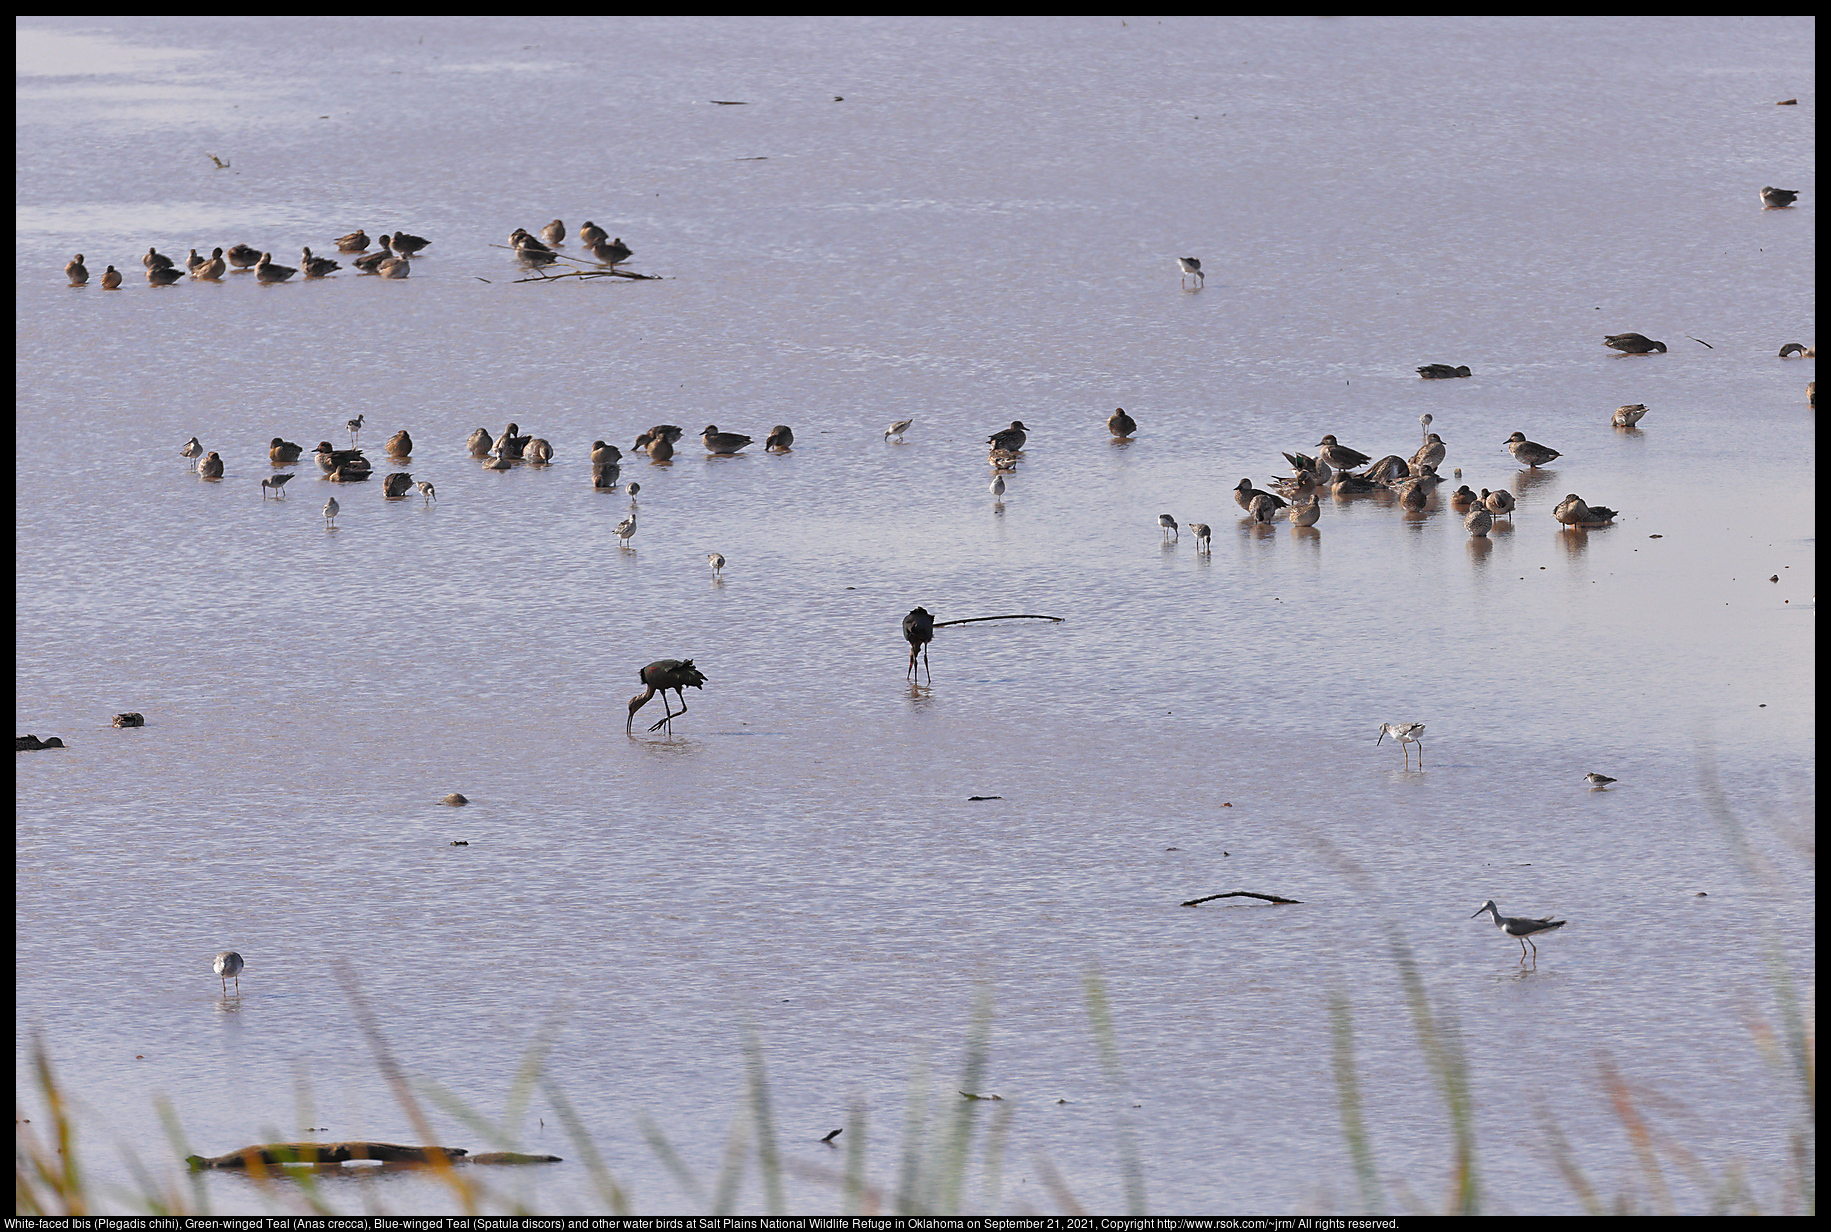 White-faced Ibis (Plegadis chihi), Green-winged Teal (Anas crecca), Blue-winged Teal (Spatula discors) and other water birds at Salt Plains National Wildlife Refuge in Oklahoma on September 21, 2021